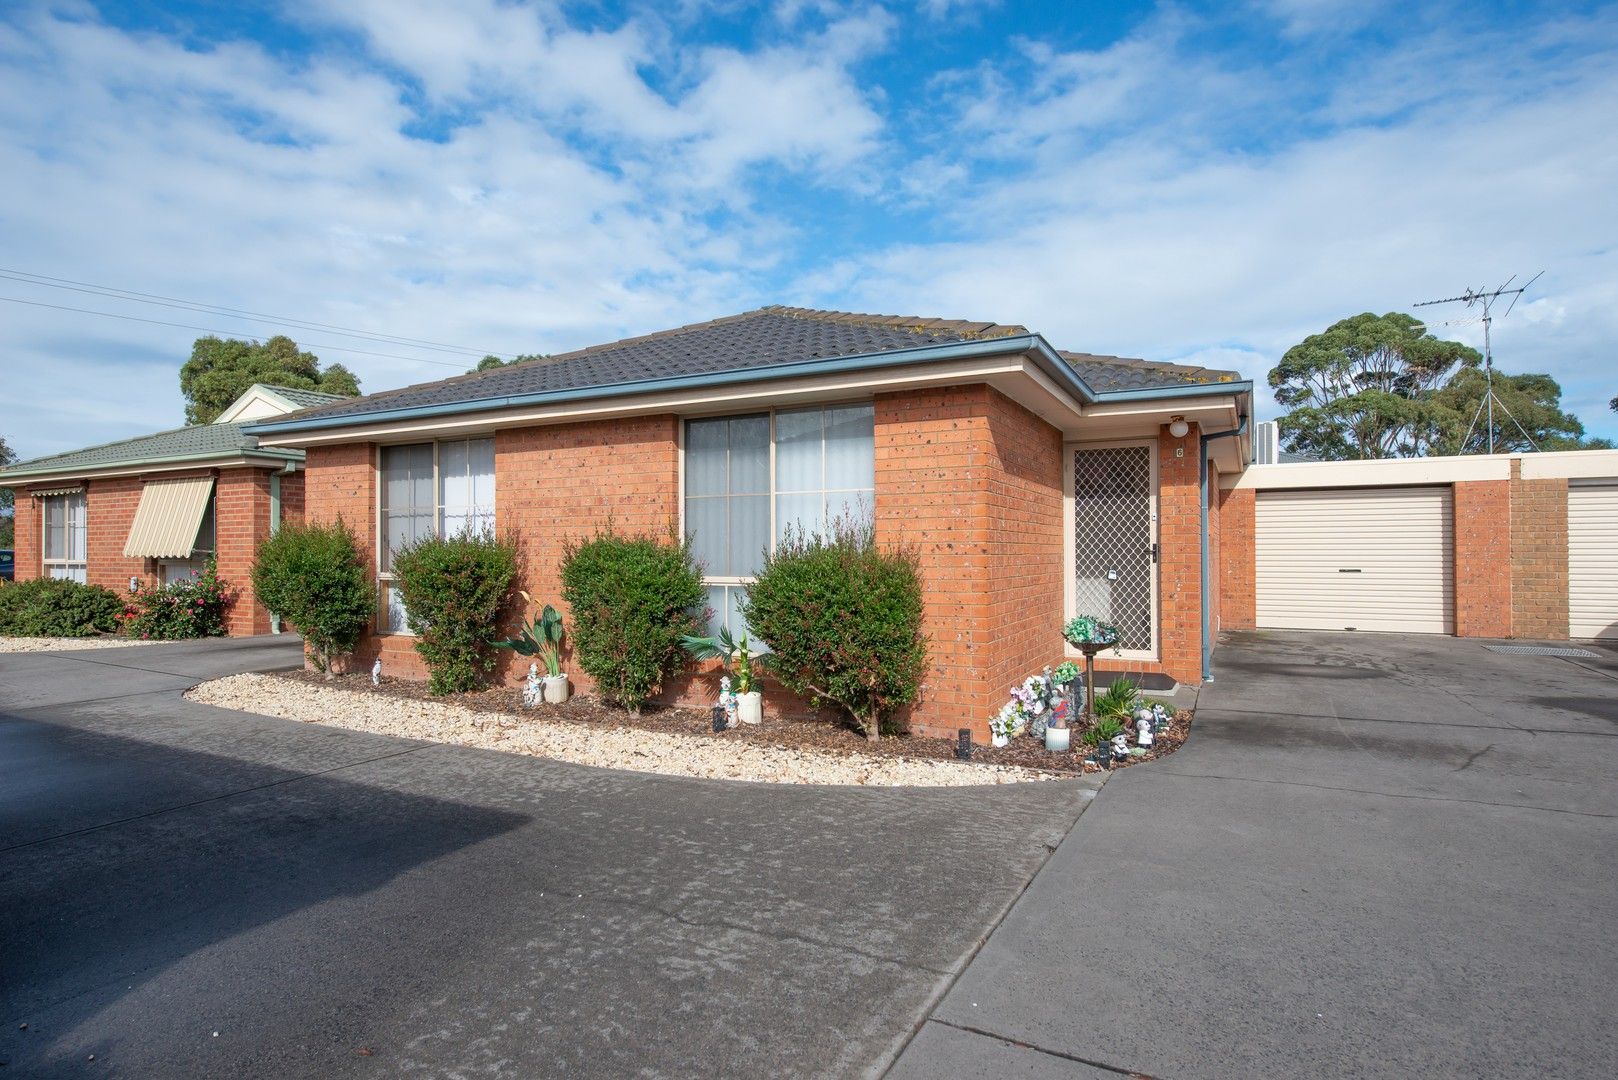 2 bedrooms Apartment / Unit / Flat in 6/25-27 South Dudley Road WONTHAGGI VIC, 3995